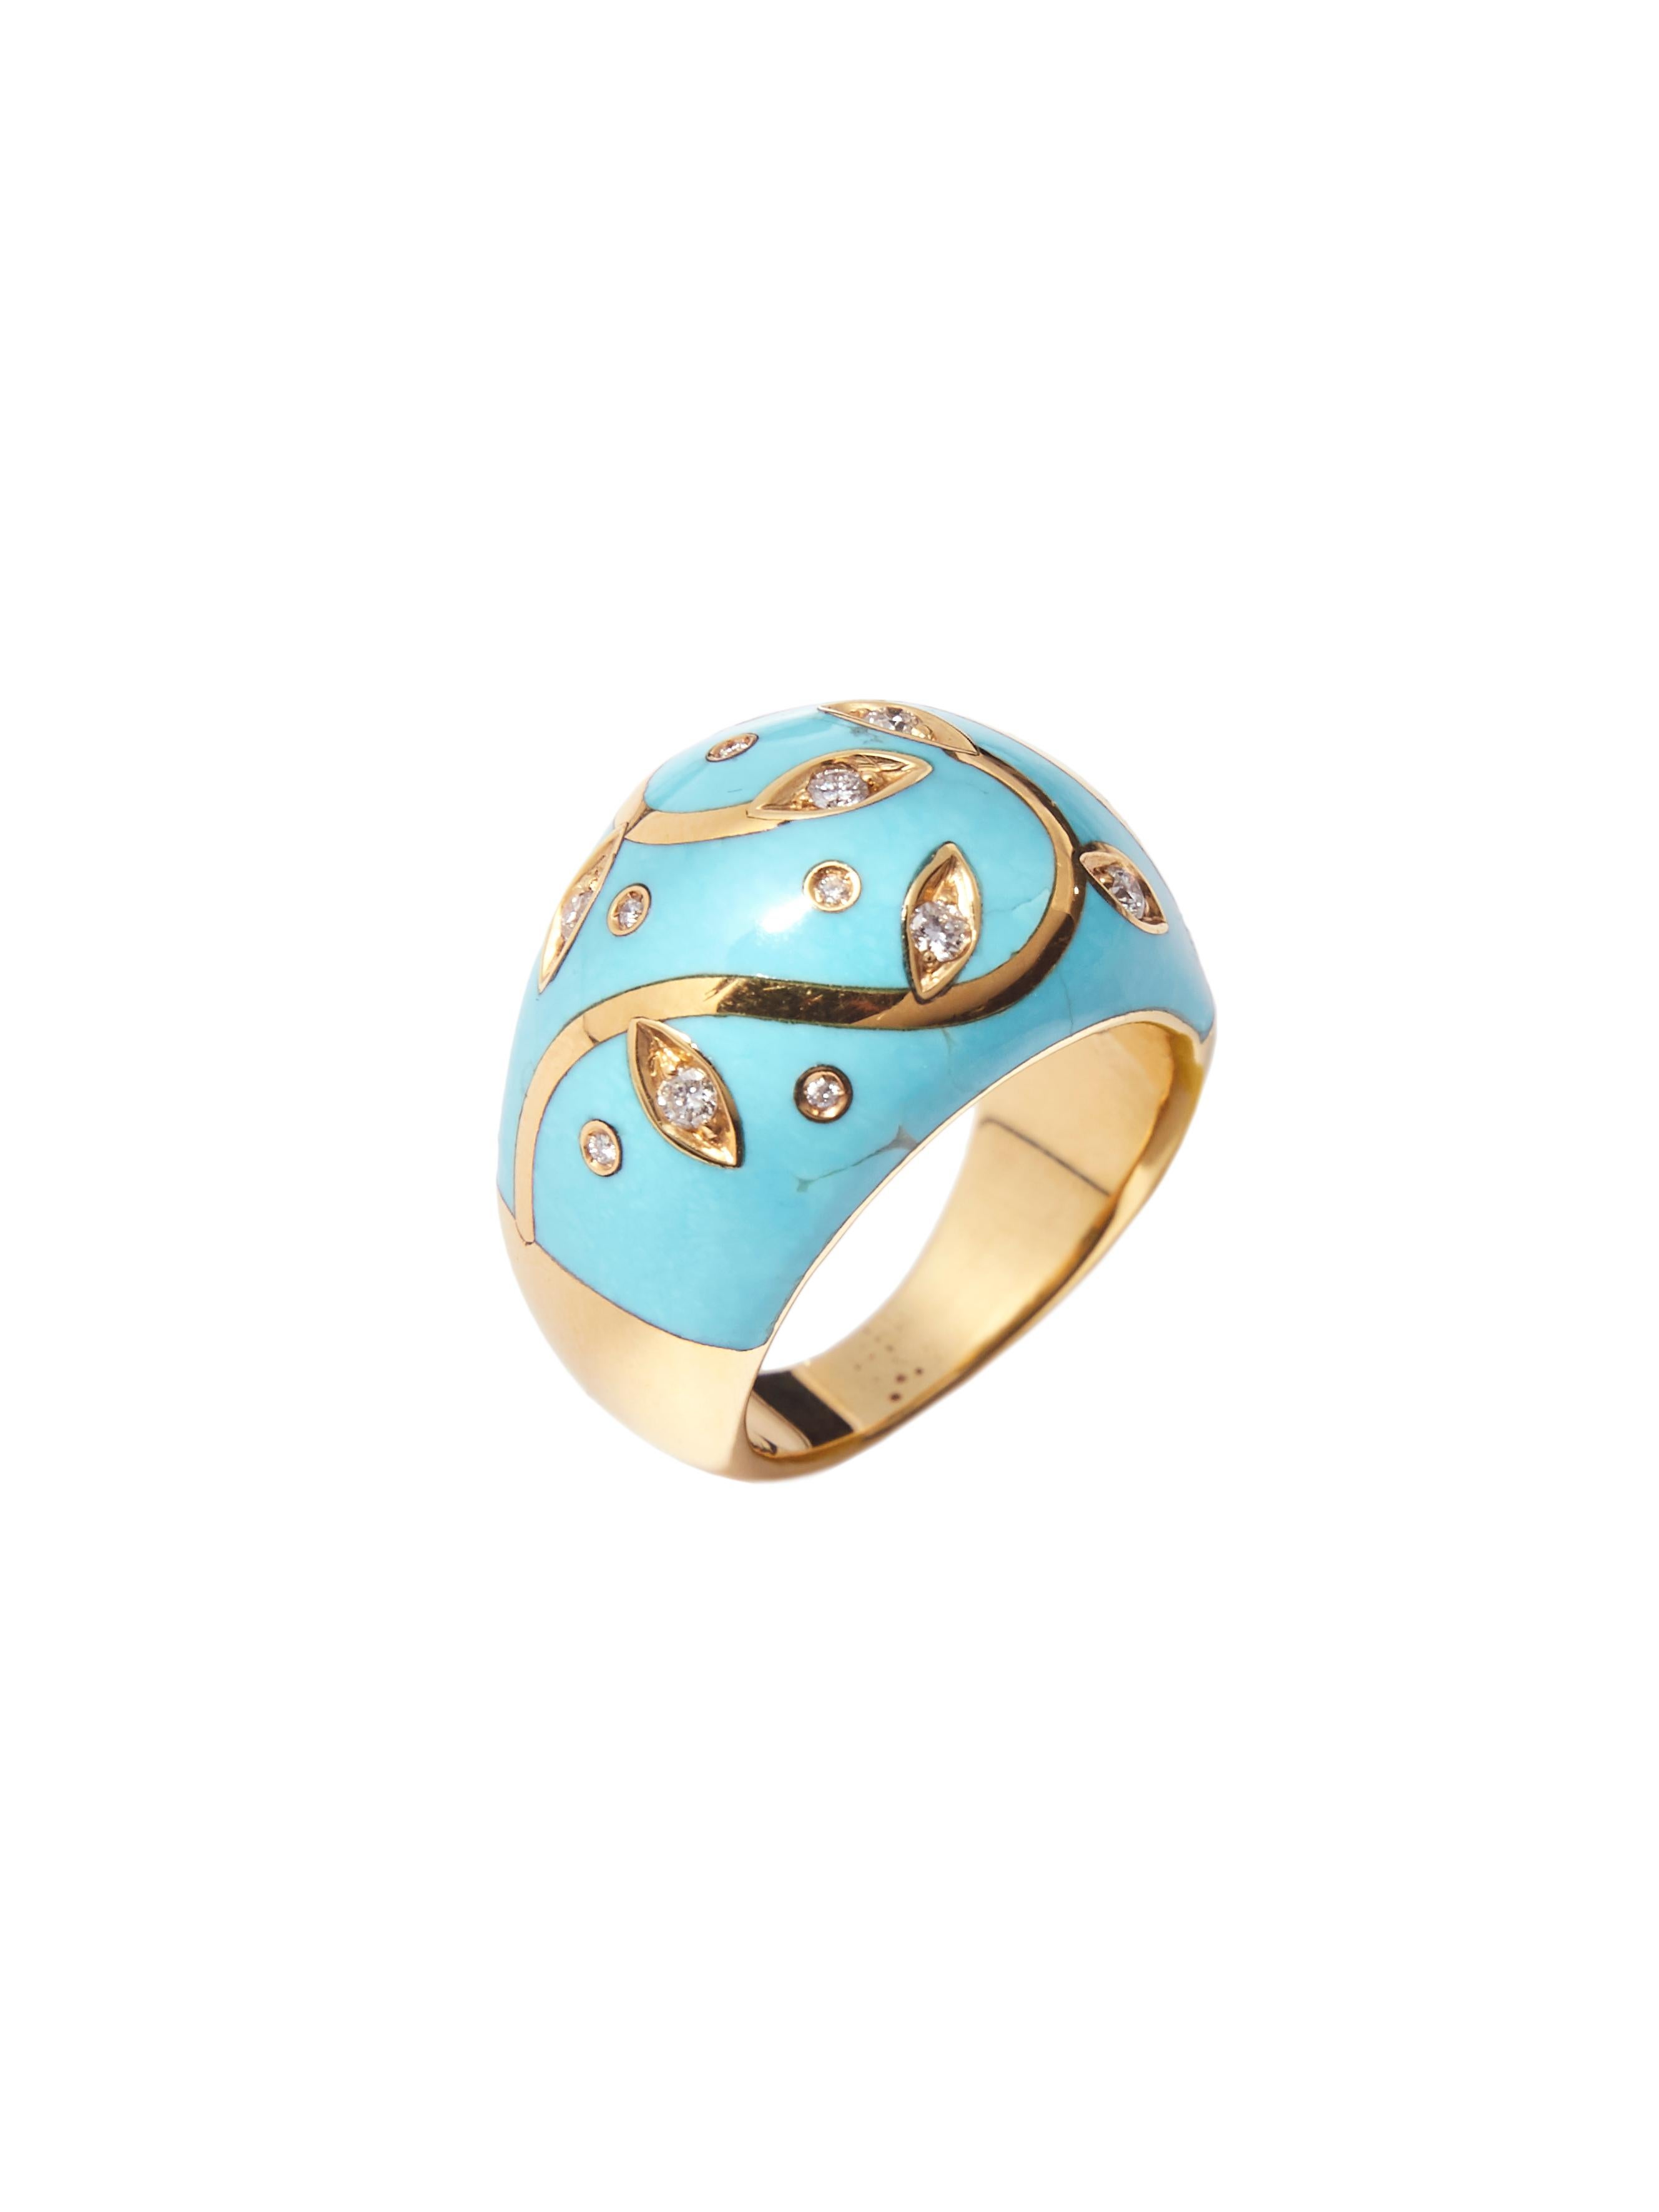 Ring sculpted in top quality Iranese turquoise with floral decoration executed with high carat yellow gold inlay and set with faceted diamonds.

Admire the beauty and craftsmanship of this ring, a piece that is truly unique; you will not find